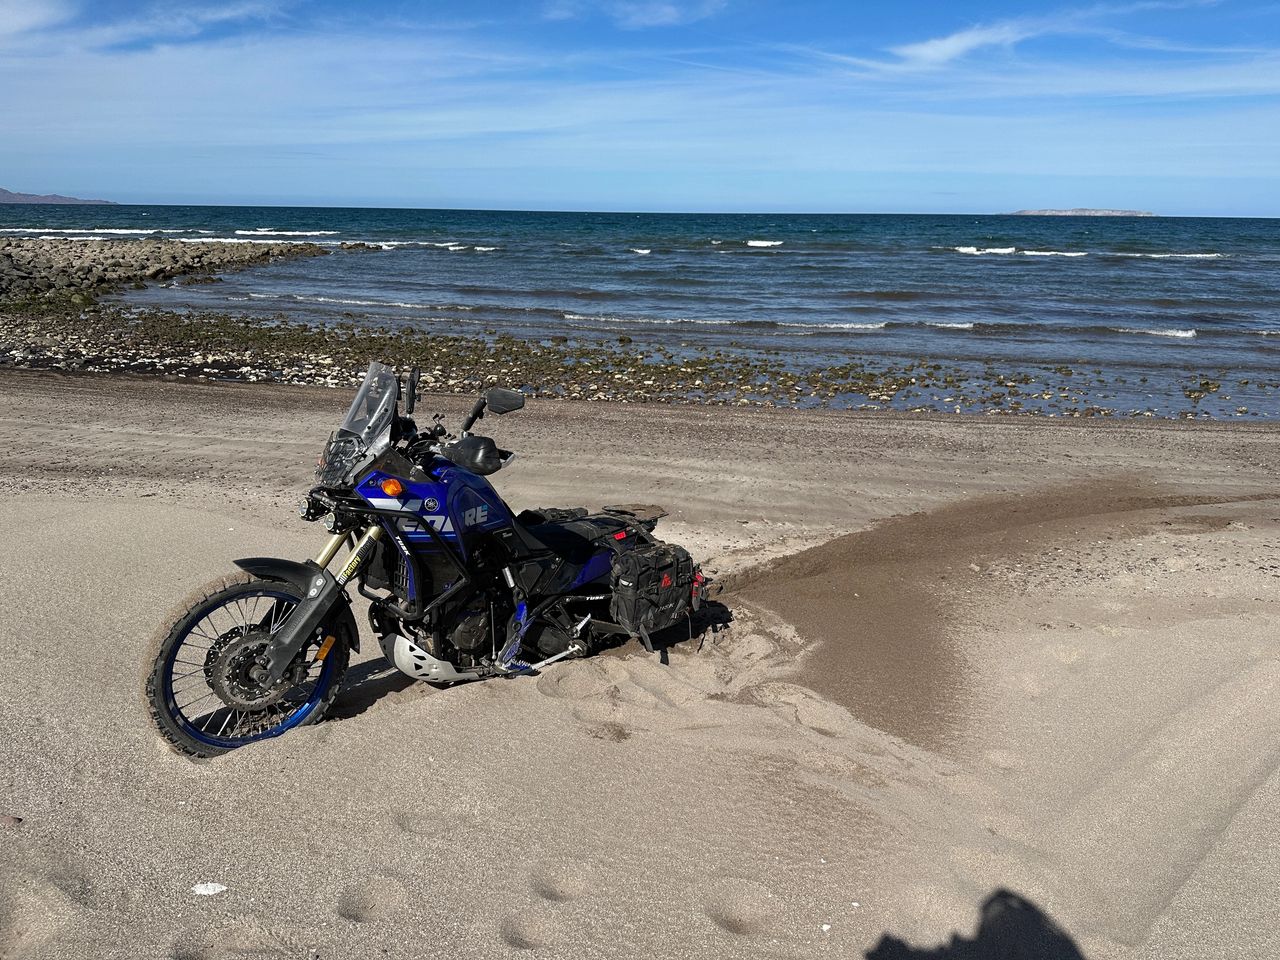 Beautiful ride on the beach gone wrong.  That sand got deep fast!